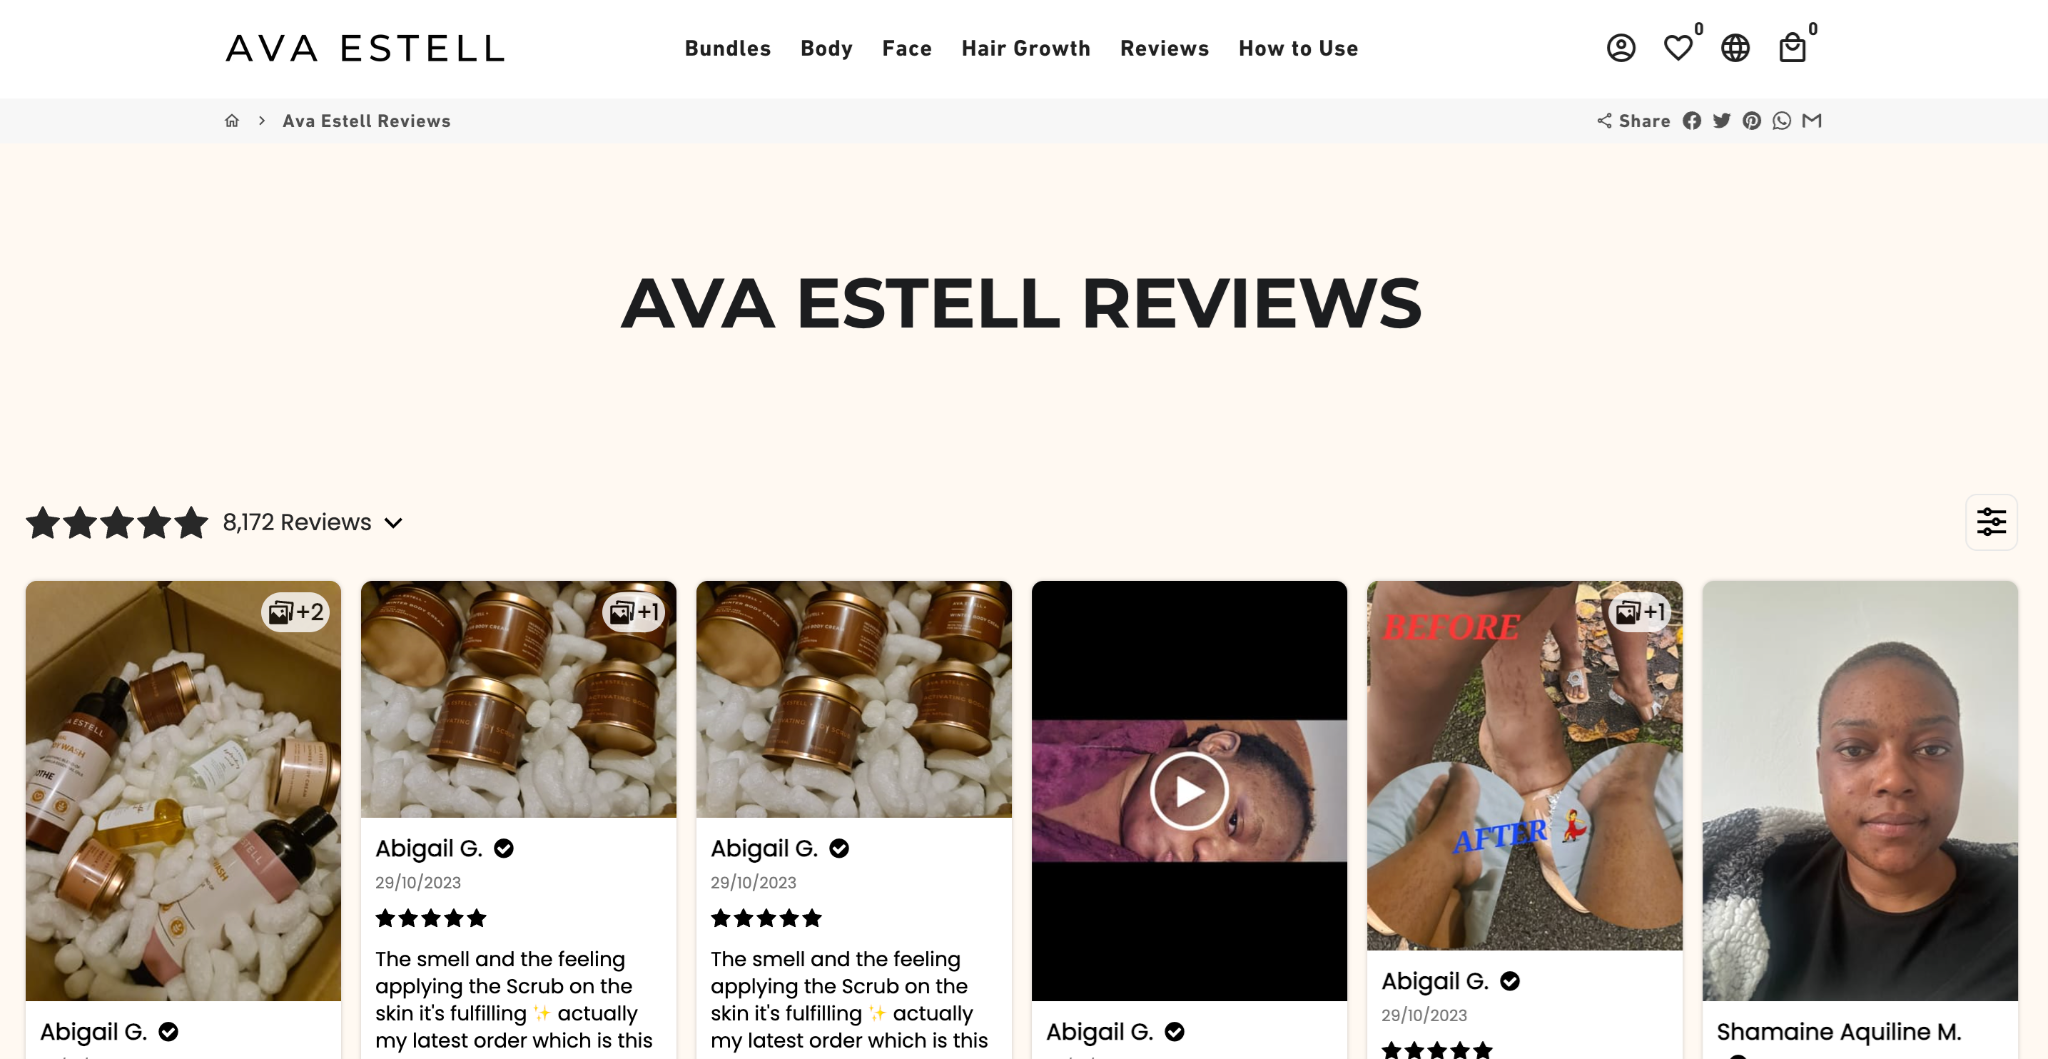 Ava Estell Reviews landing page example